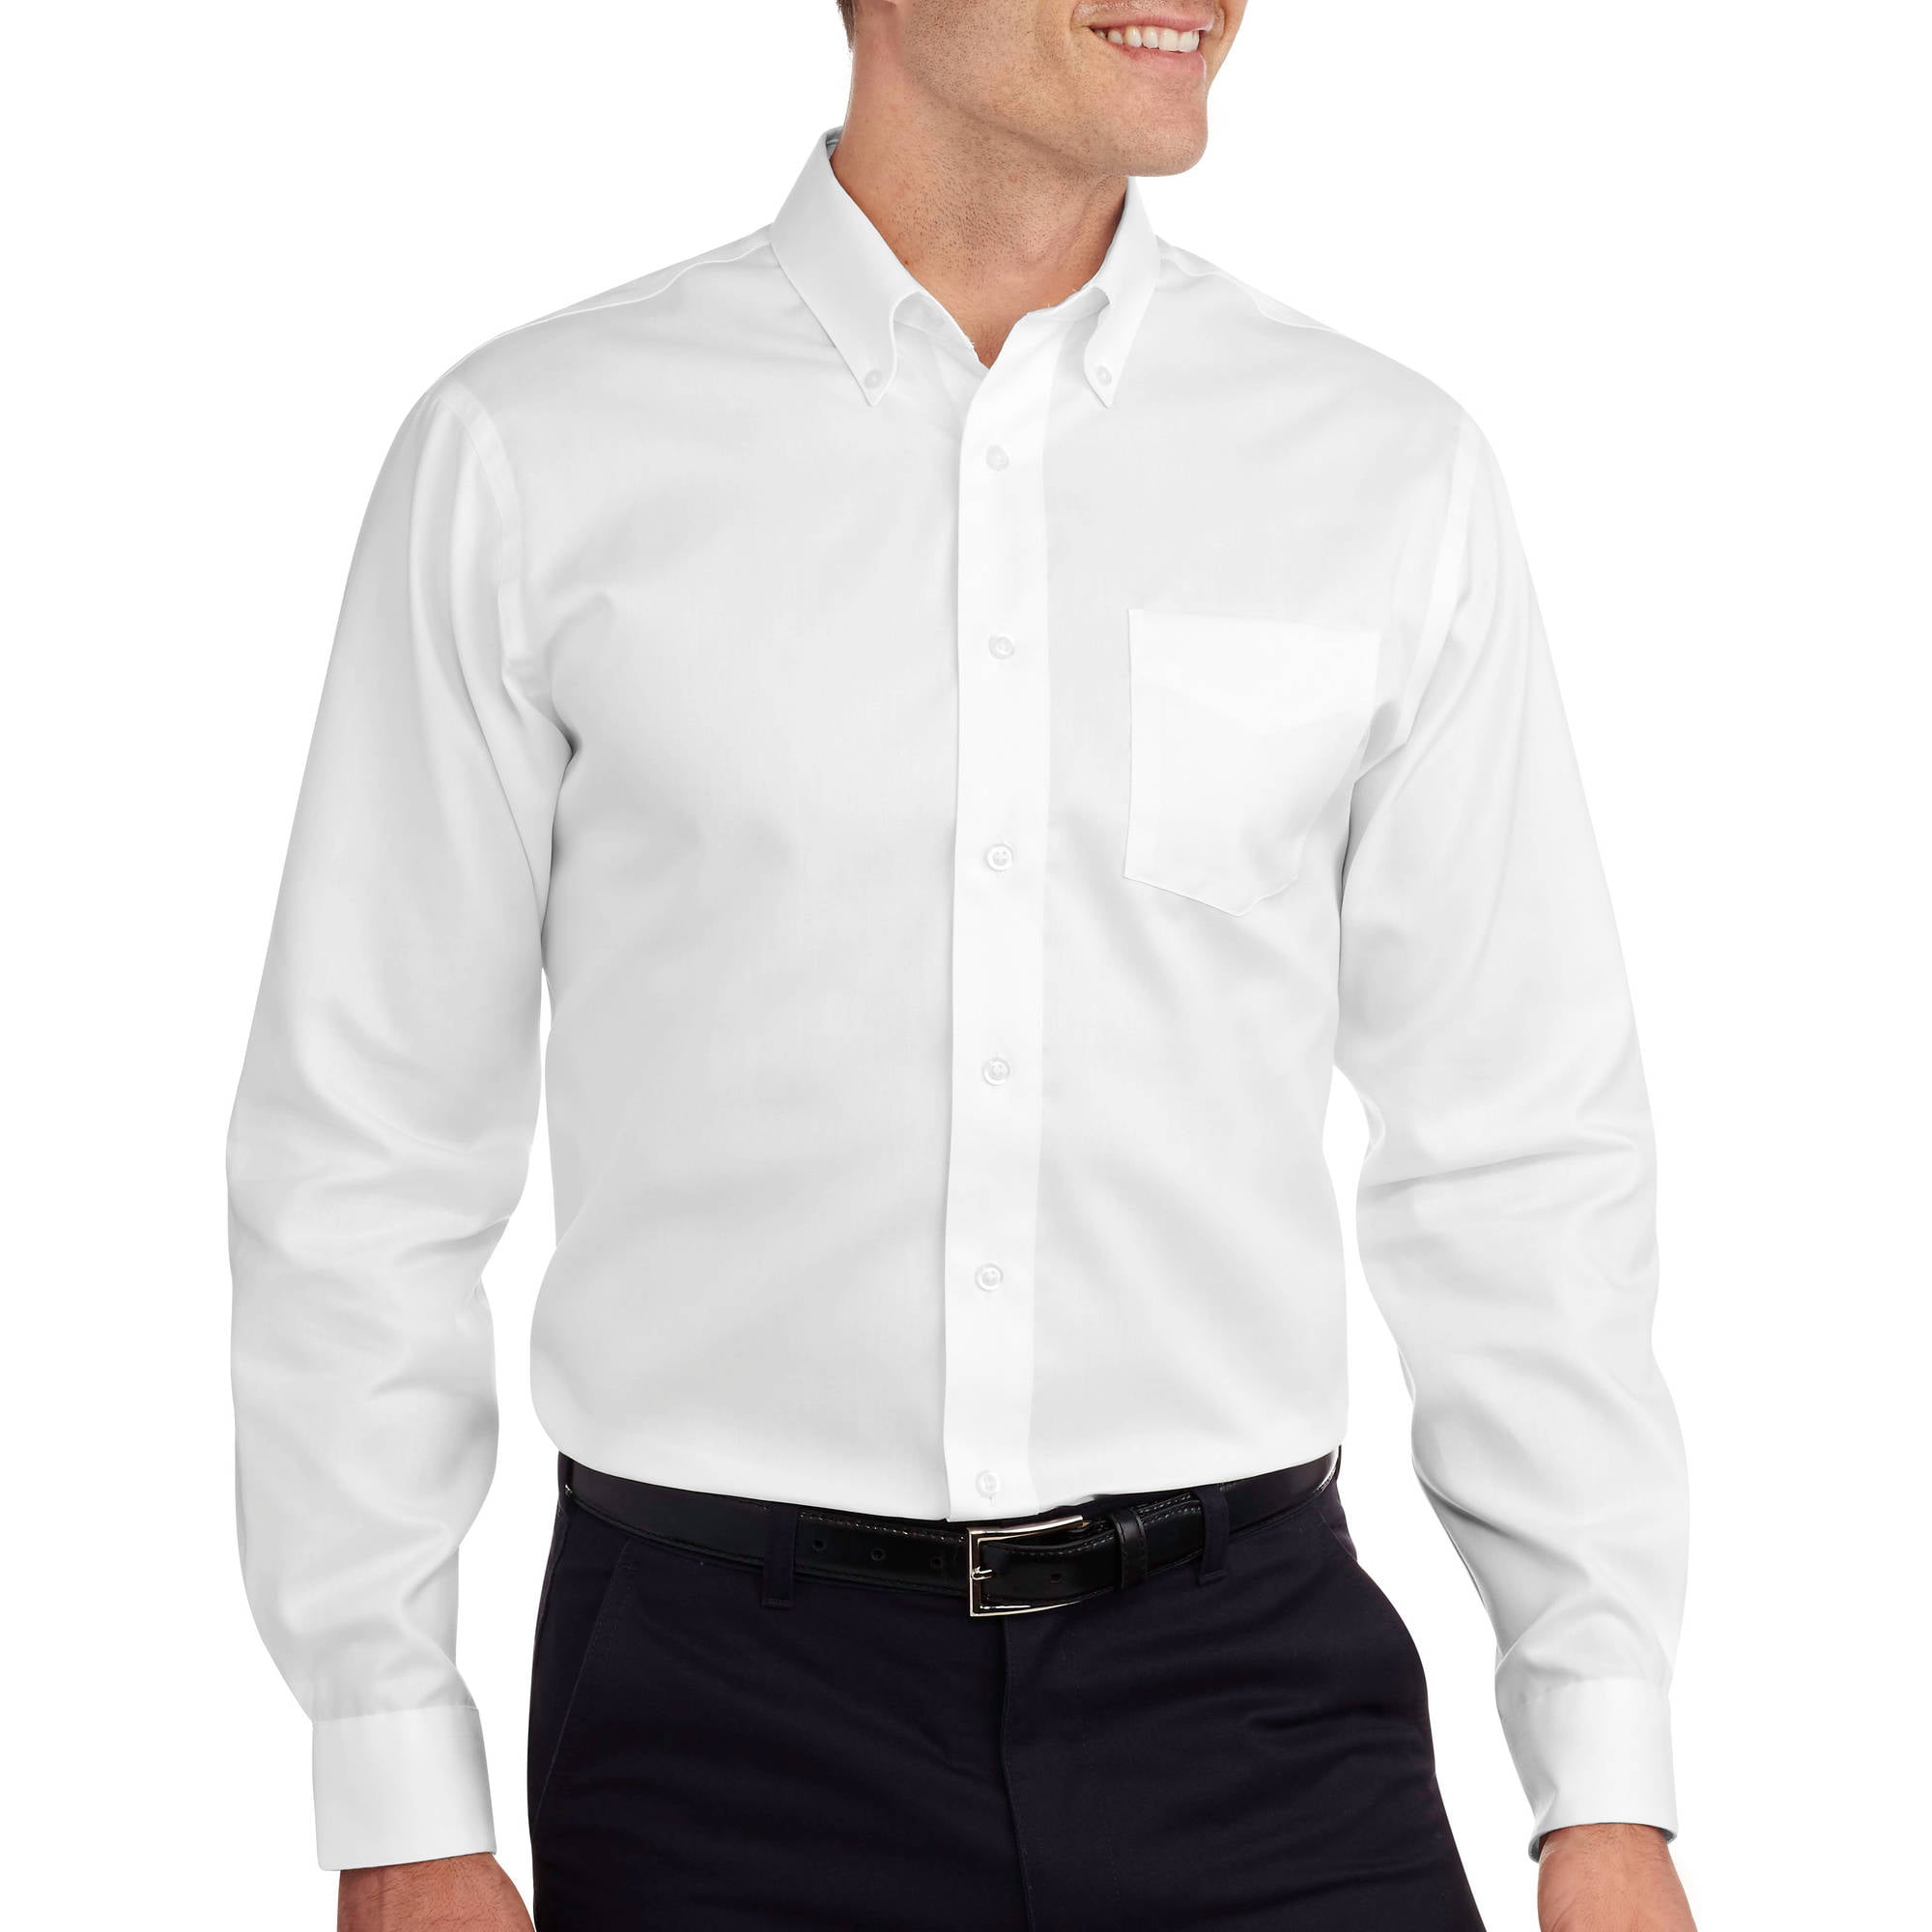 Buy > george dress shirts > in stock